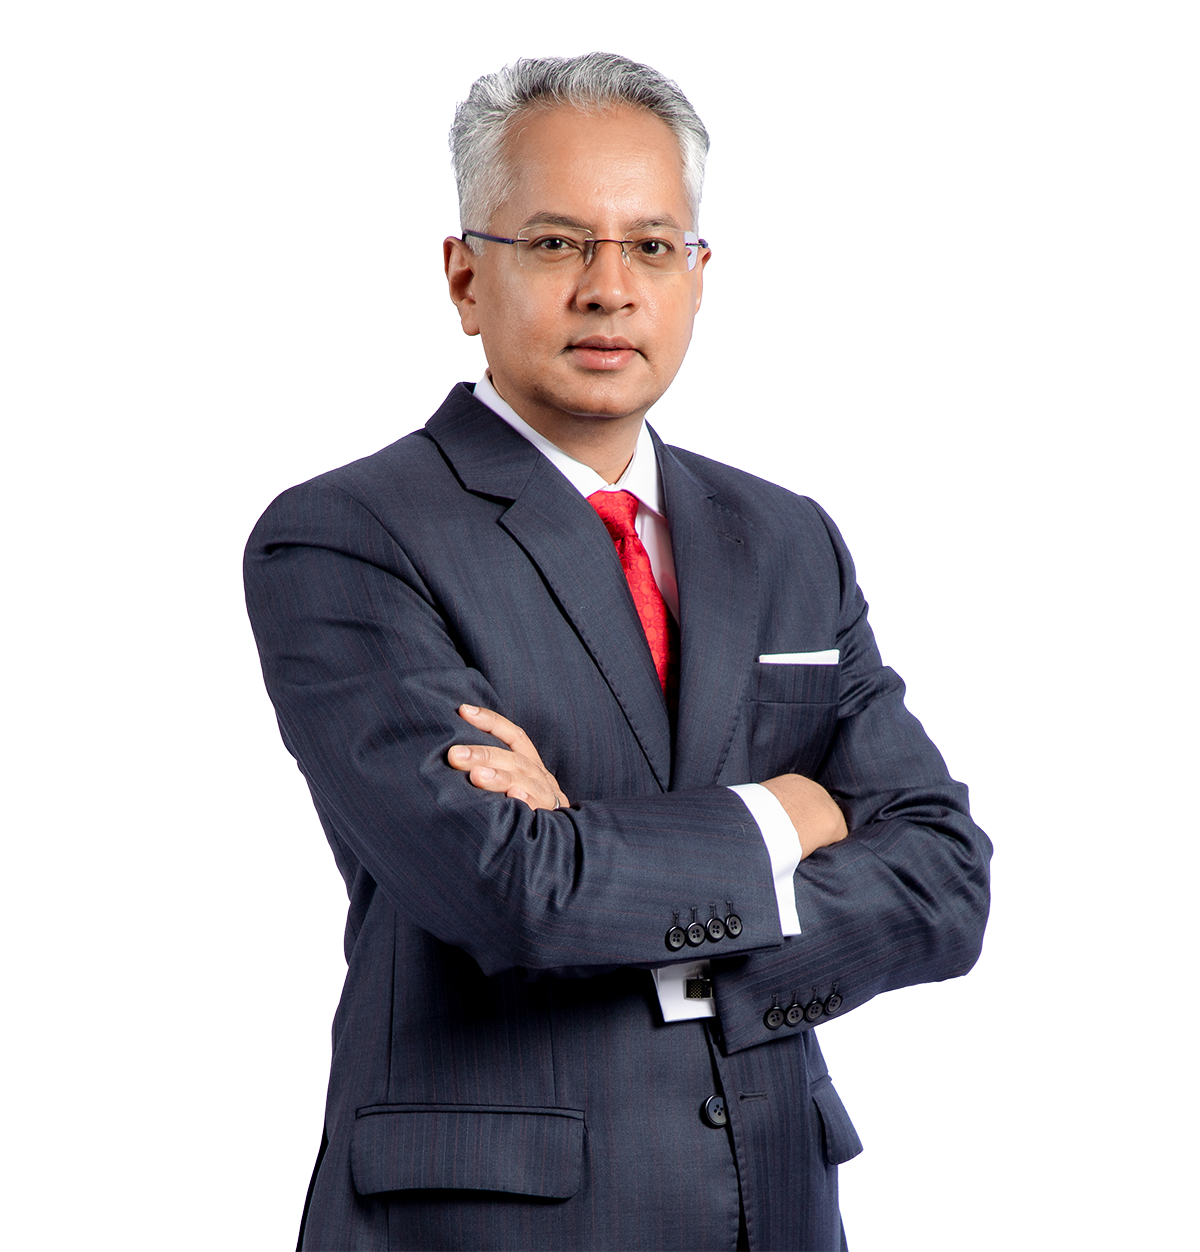 Sime Darby Property’s Group Managing Director, Dato’ Azmir Merican said the Company’s ability to respond to market conditions and proactively seize opportunities has enabled it to post a solid performance for the quarter through a well-executed plan.